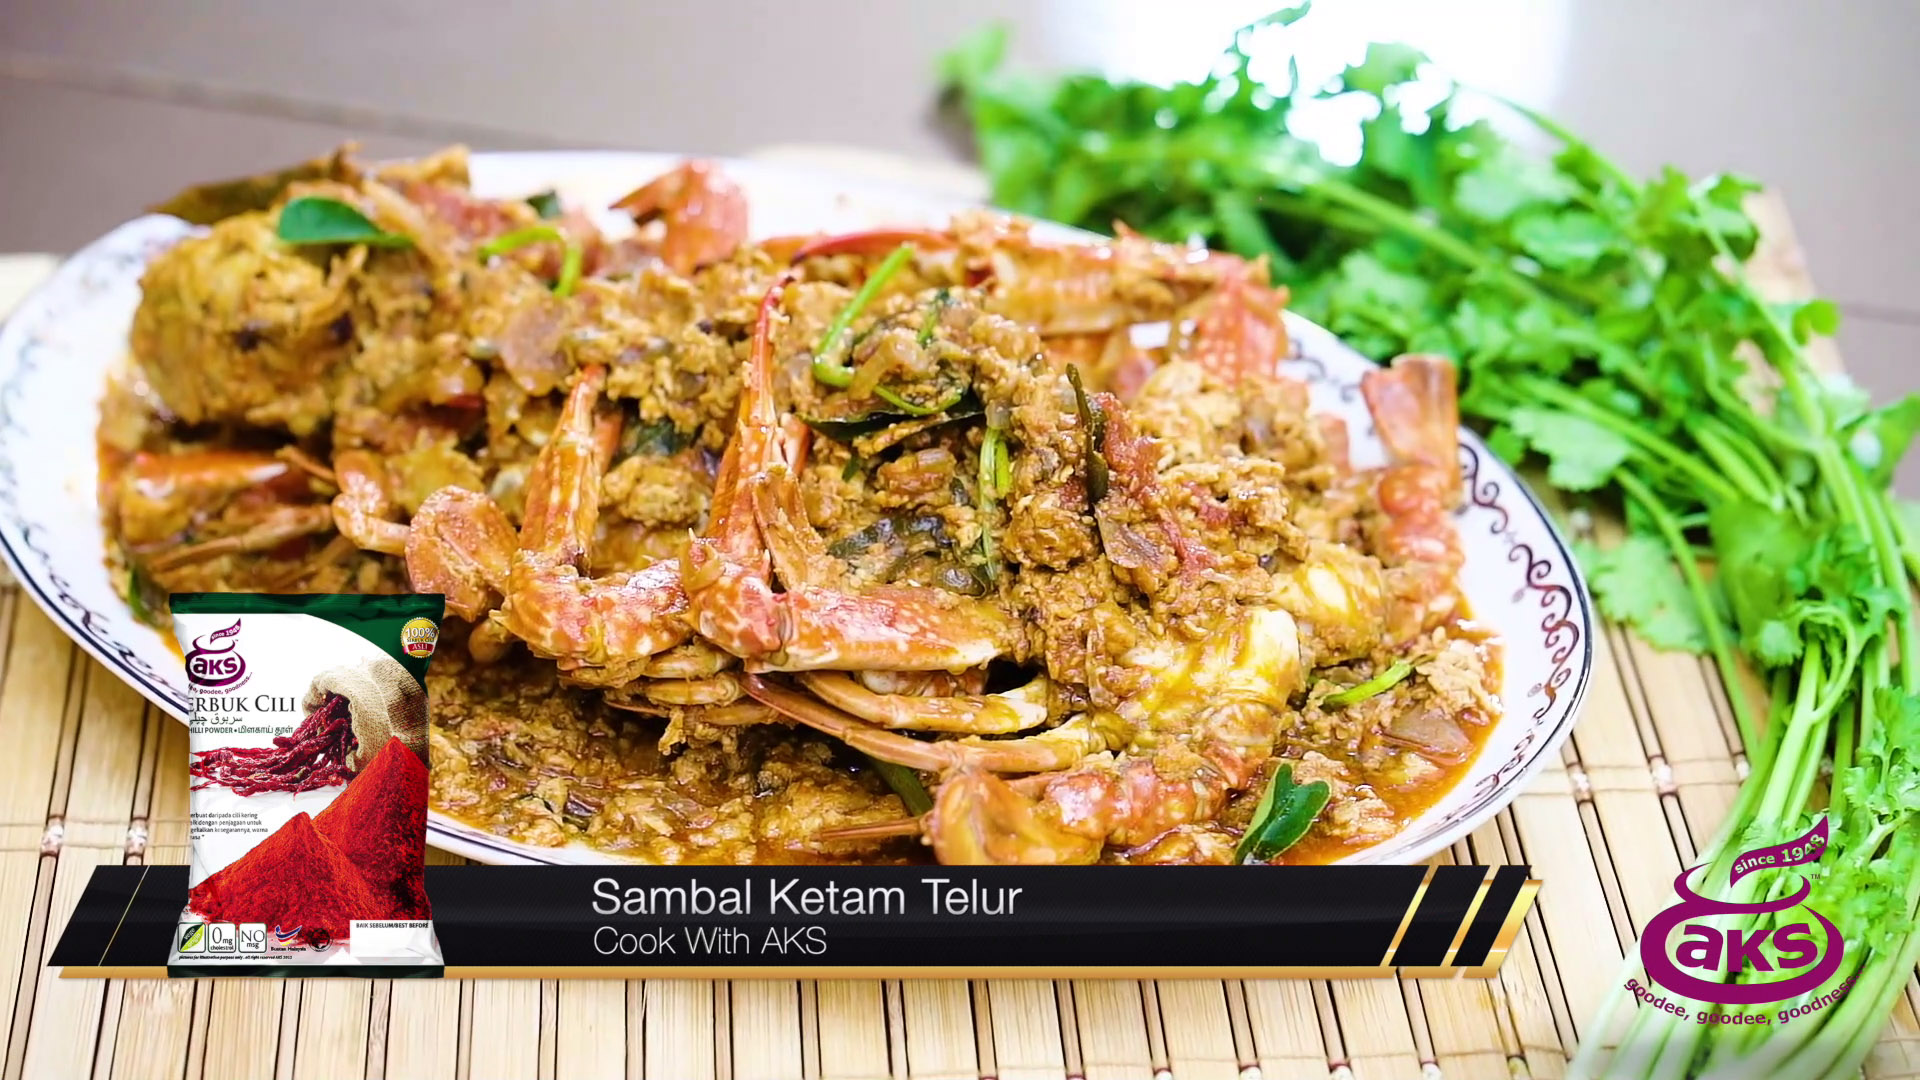 Powerful and Delicious Spicy Crab and Egg Sambal.